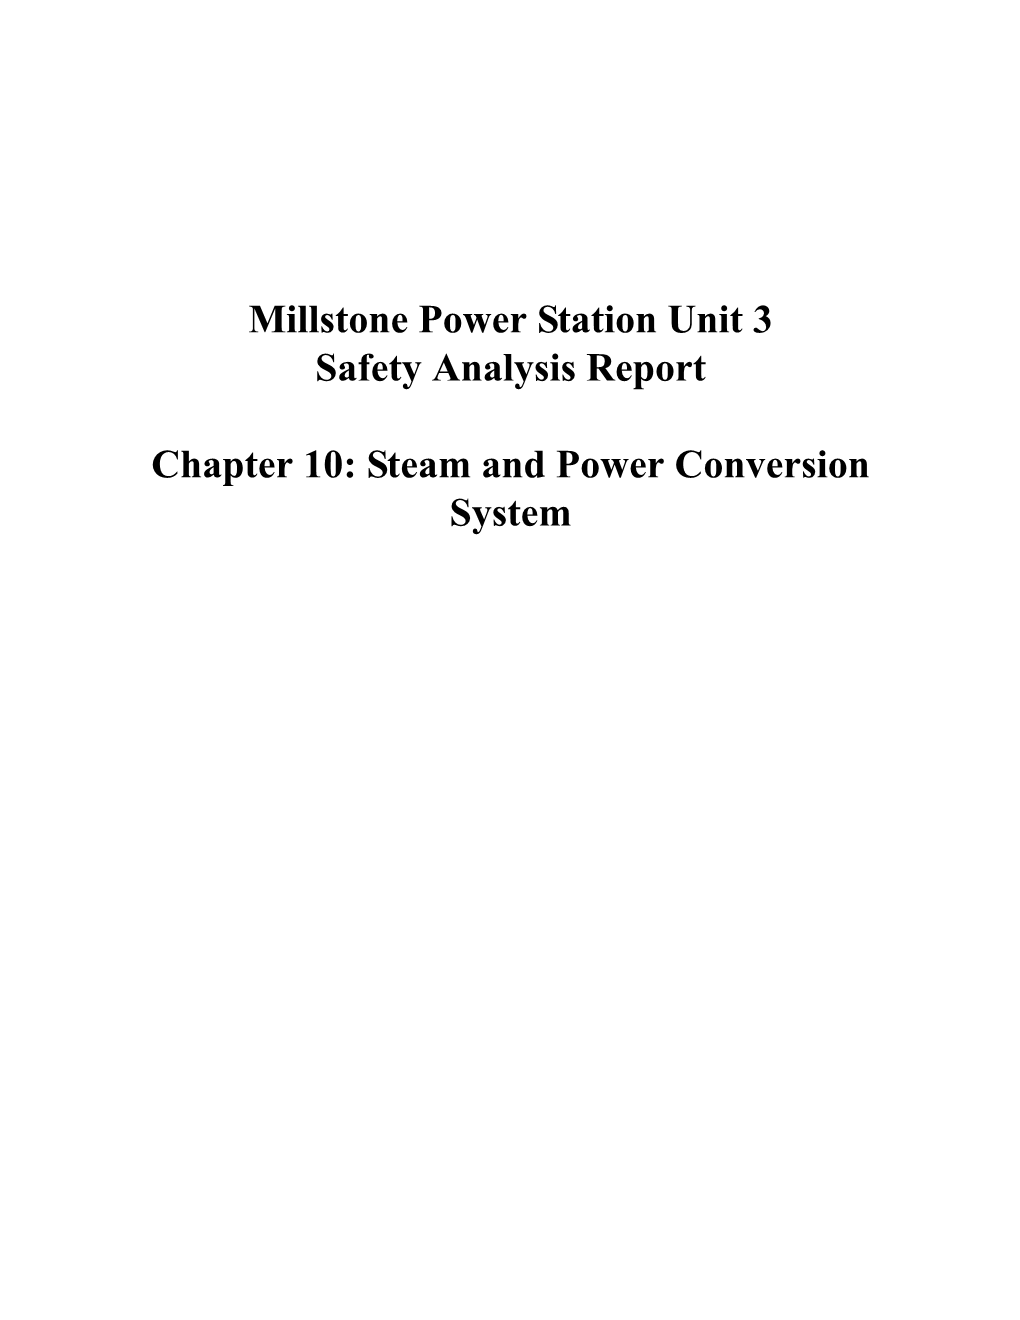 Steam and Power Conversion System MPS-3 FSAR